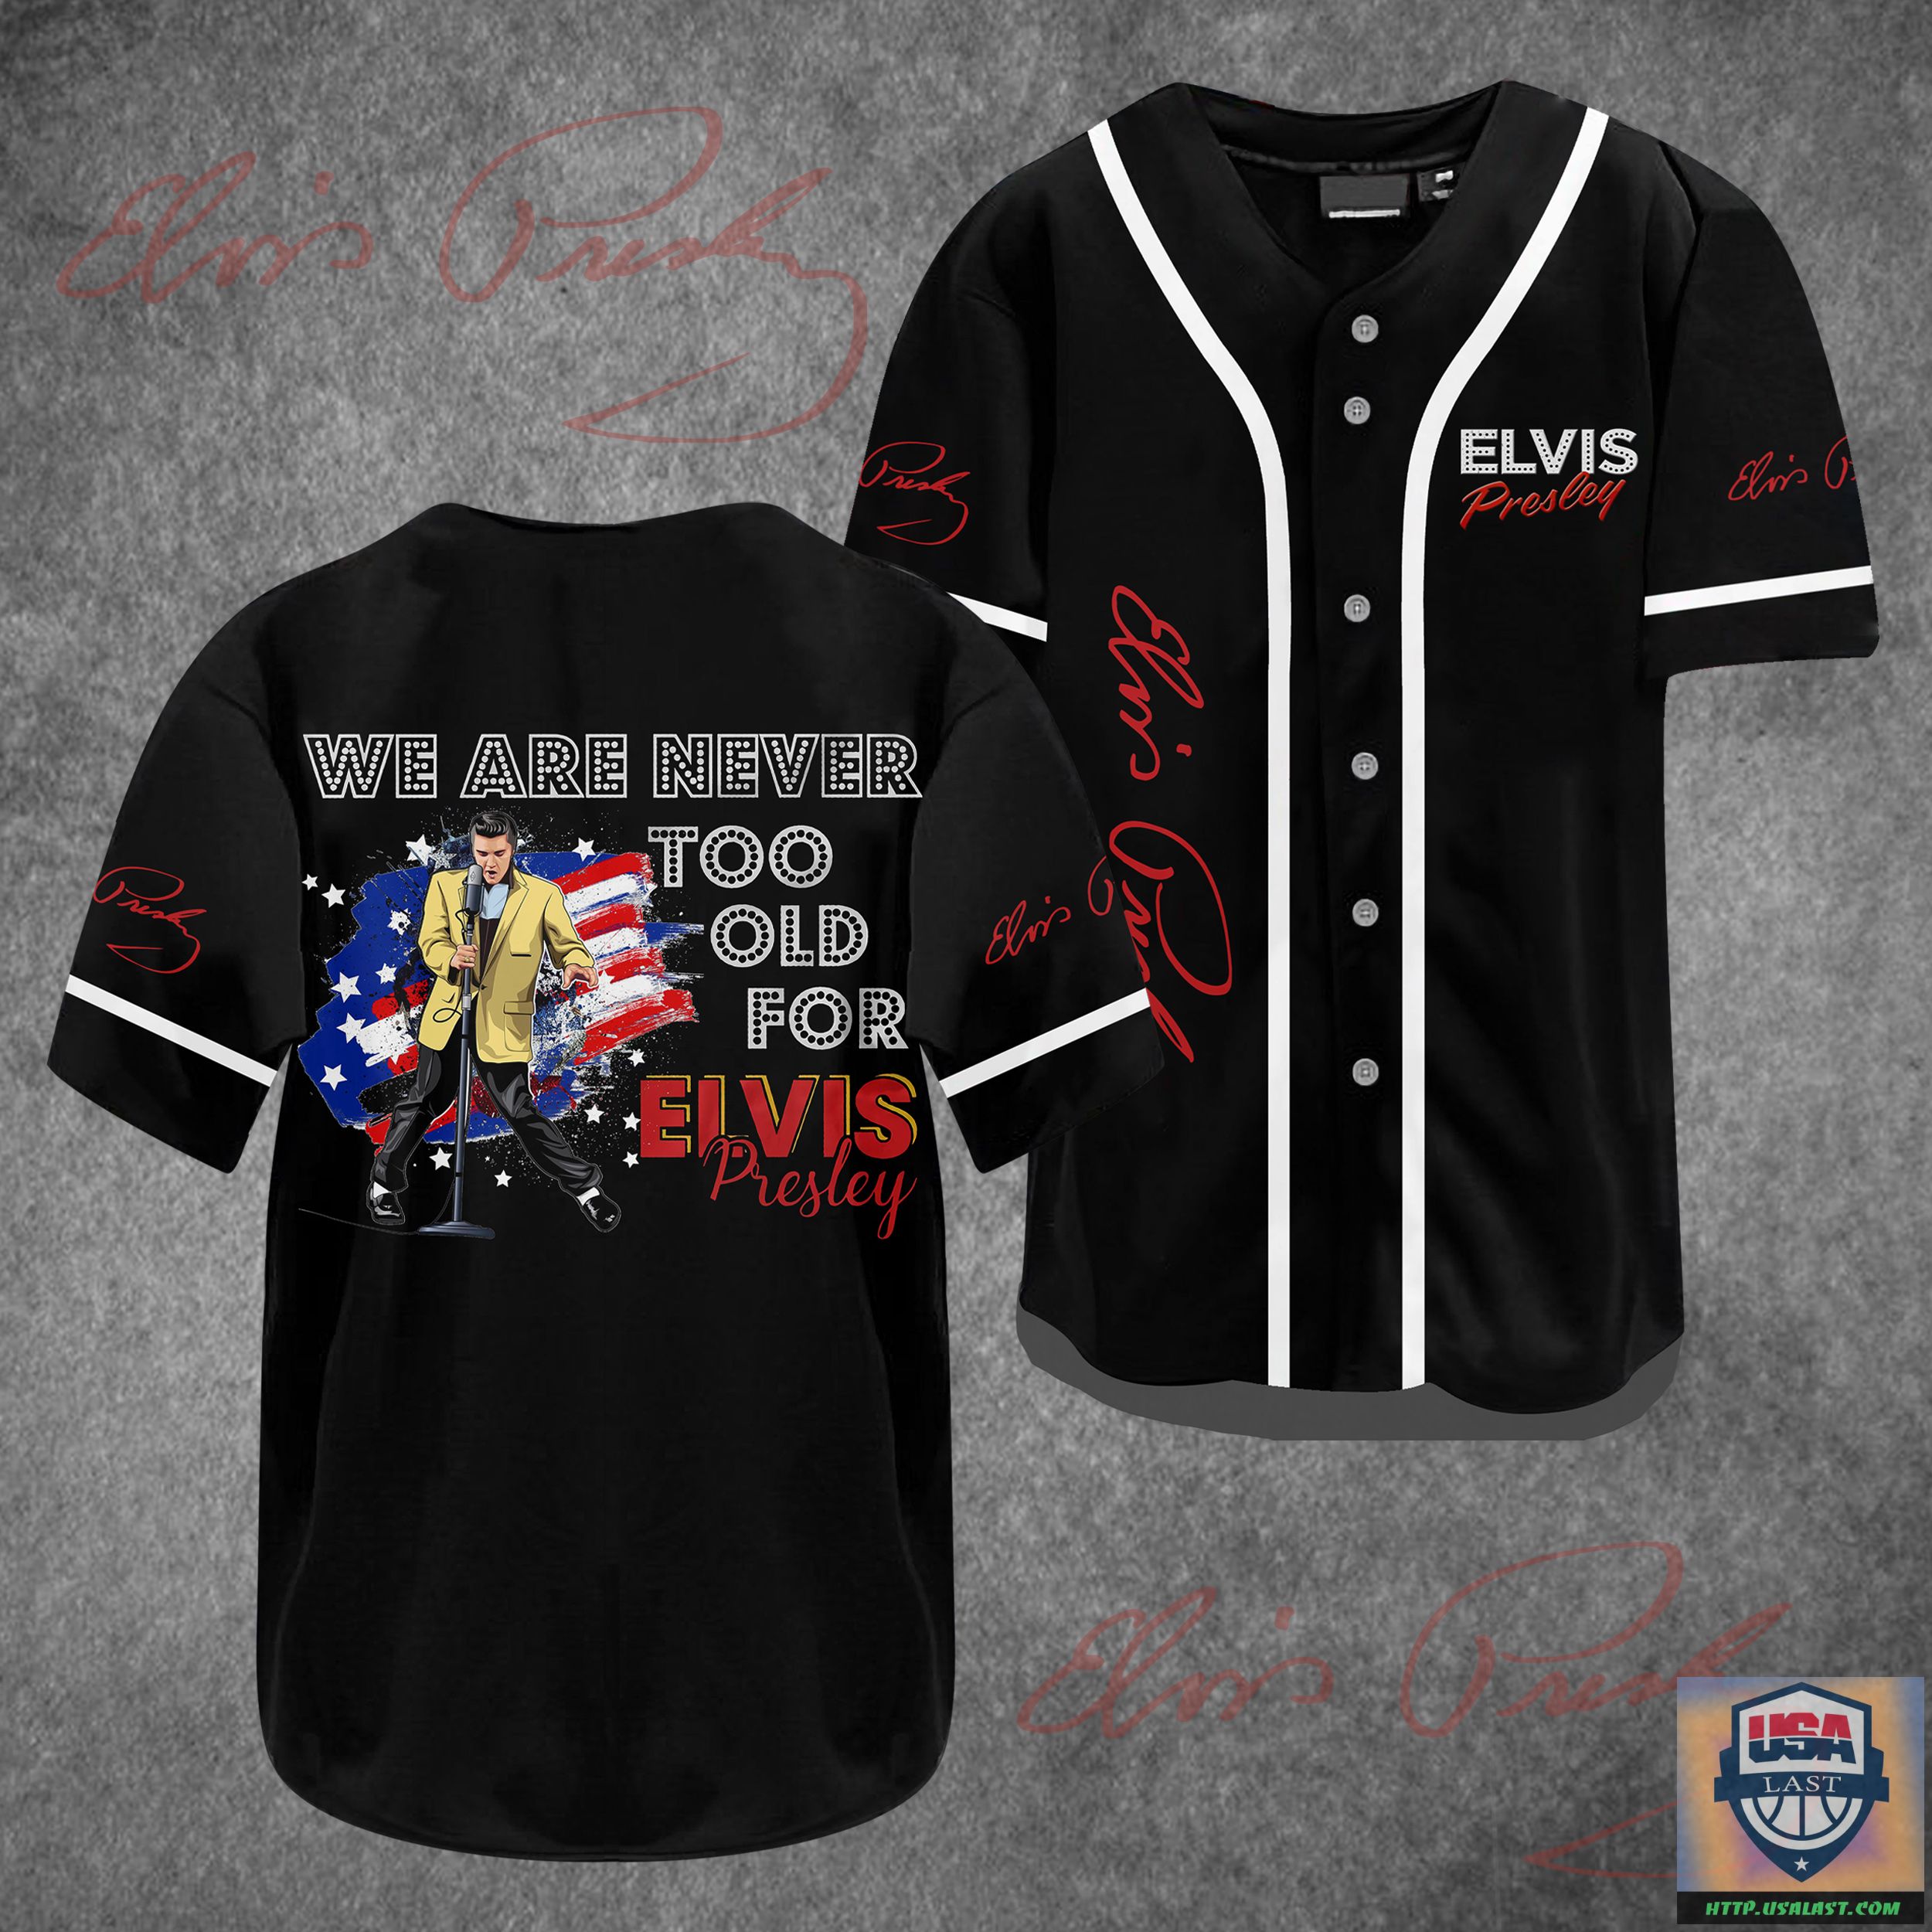 wW4wzsF2-T220722-02xxxWe-Are-Never-Too-Old-For-Elvis-Presley-Baseball-Jersey-Shirt.jpg